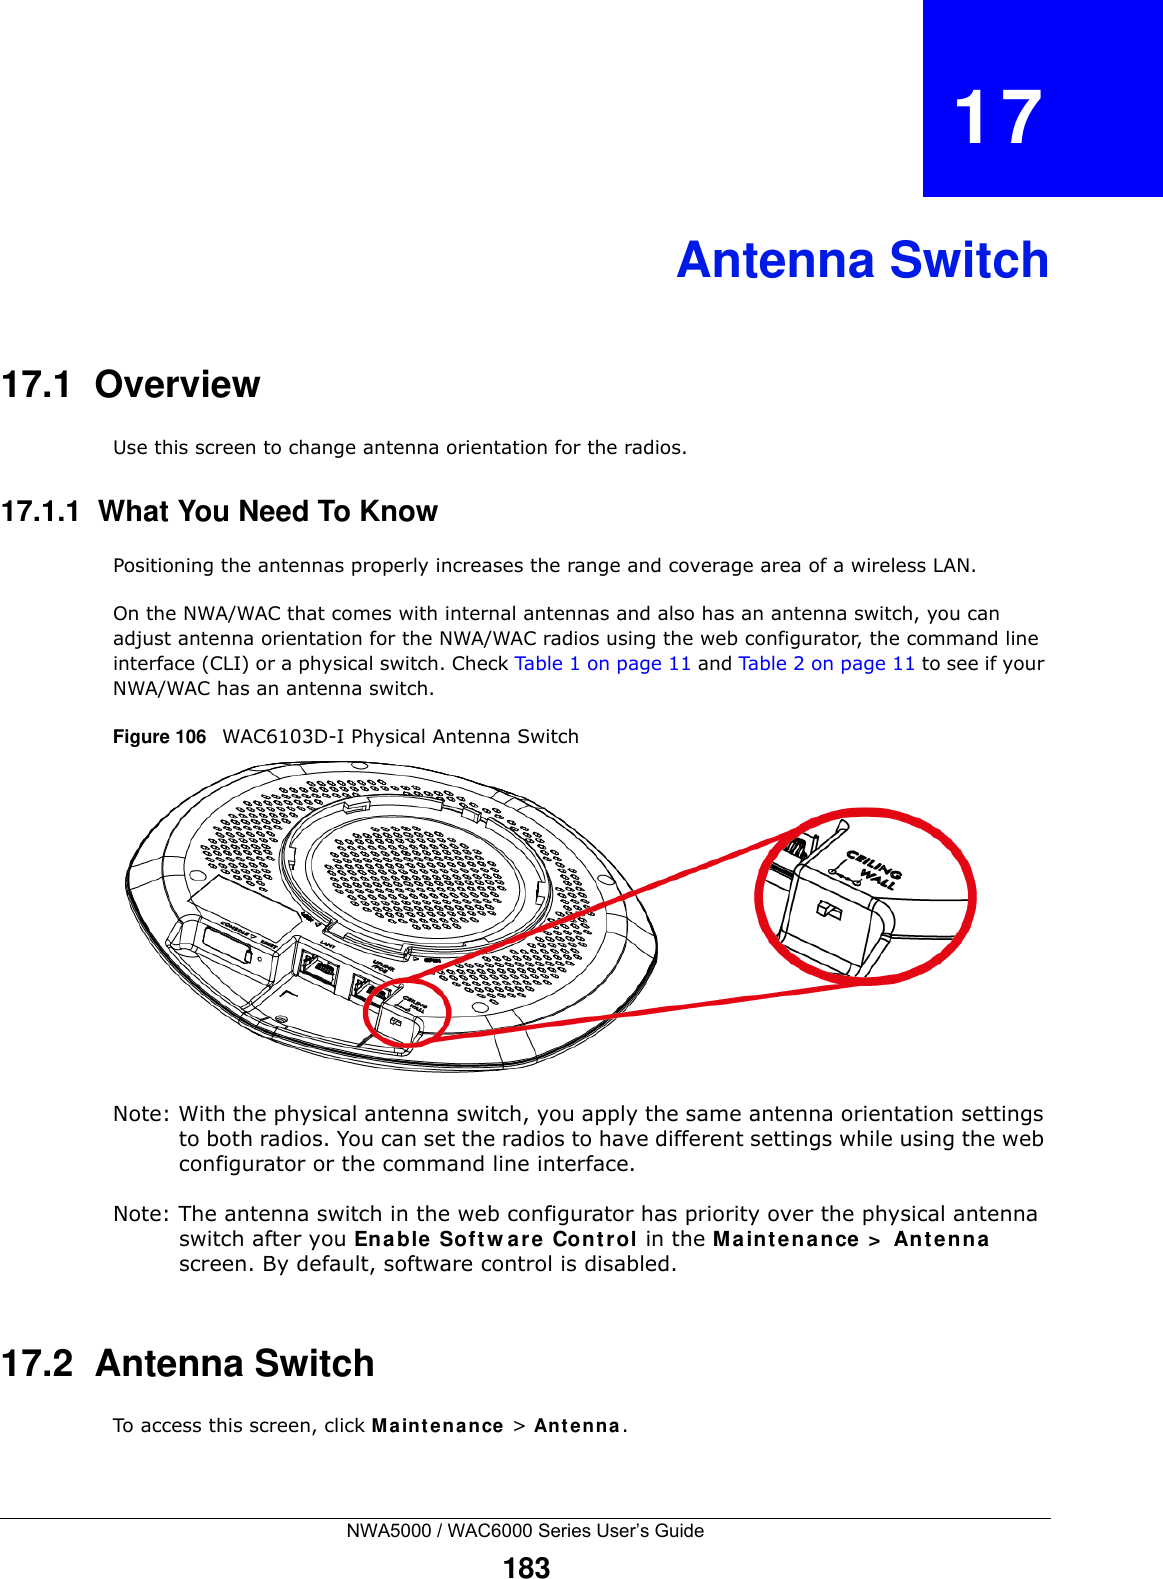 NWA5000 / WAC6000 Series User’s Guide183CHAPTER   17Antenna Switch17.1  OverviewUse this screen to change antenna orientation for the radios.17.1.1  What You Need To KnowPositioning the antennas properly increases the range and coverage area of a wireless LAN.On the NWA/WAC that comes with internal antennas and also has an antenna switch, you can adjust antenna orientation for the NWA/WAC radios using the web configurator, the command line interface (CLI) or a physical switch. Check Table 1 on page 11 and Table 2 on page 11 to see if your NWA/WAC has an antenna switch.Figure 106   WAC6103D-I Physical Antenna Switch Note: With the physical antenna switch, you apply the same antenna orientation settings to both radios. You can set the radios to have different settings while using the web configurator or the command line interface.Note: The antenna switch in the web configurator has priority over the physical antenna switch after you Ena ble Soft w ar e Cont rol in the Ma int e nance &gt;  Ant en na  screen. By default, software control is disabled.17.2  Antenna SwitchTo access this screen, click M a in t e na nce  &gt; An t e n na .